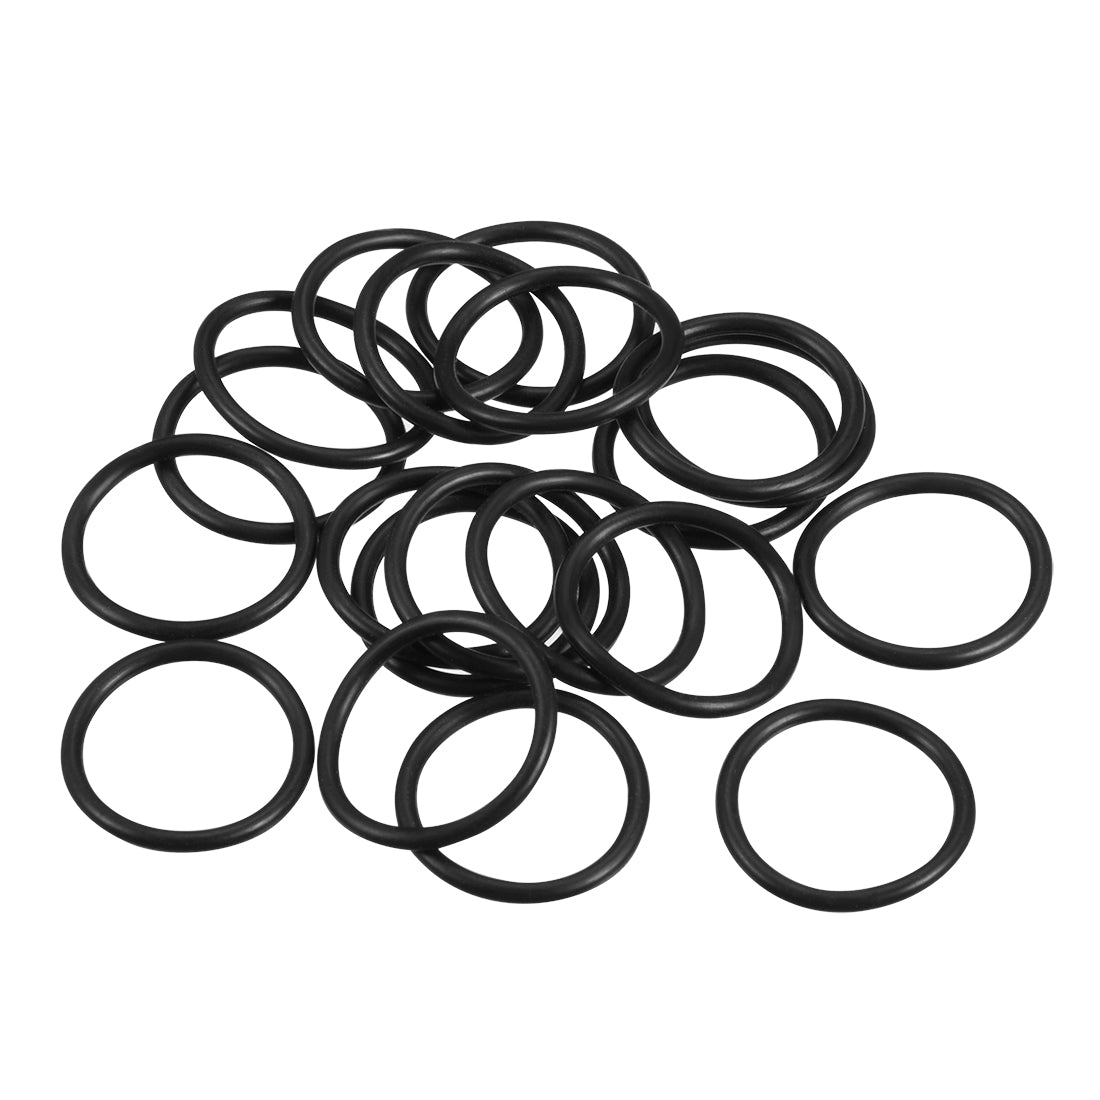 uxcell Uxcell O-Rings Nitrile Rubber 19mm x 22.6mm x 1.8mm Seal Rings Sealing Gasket 20pcs